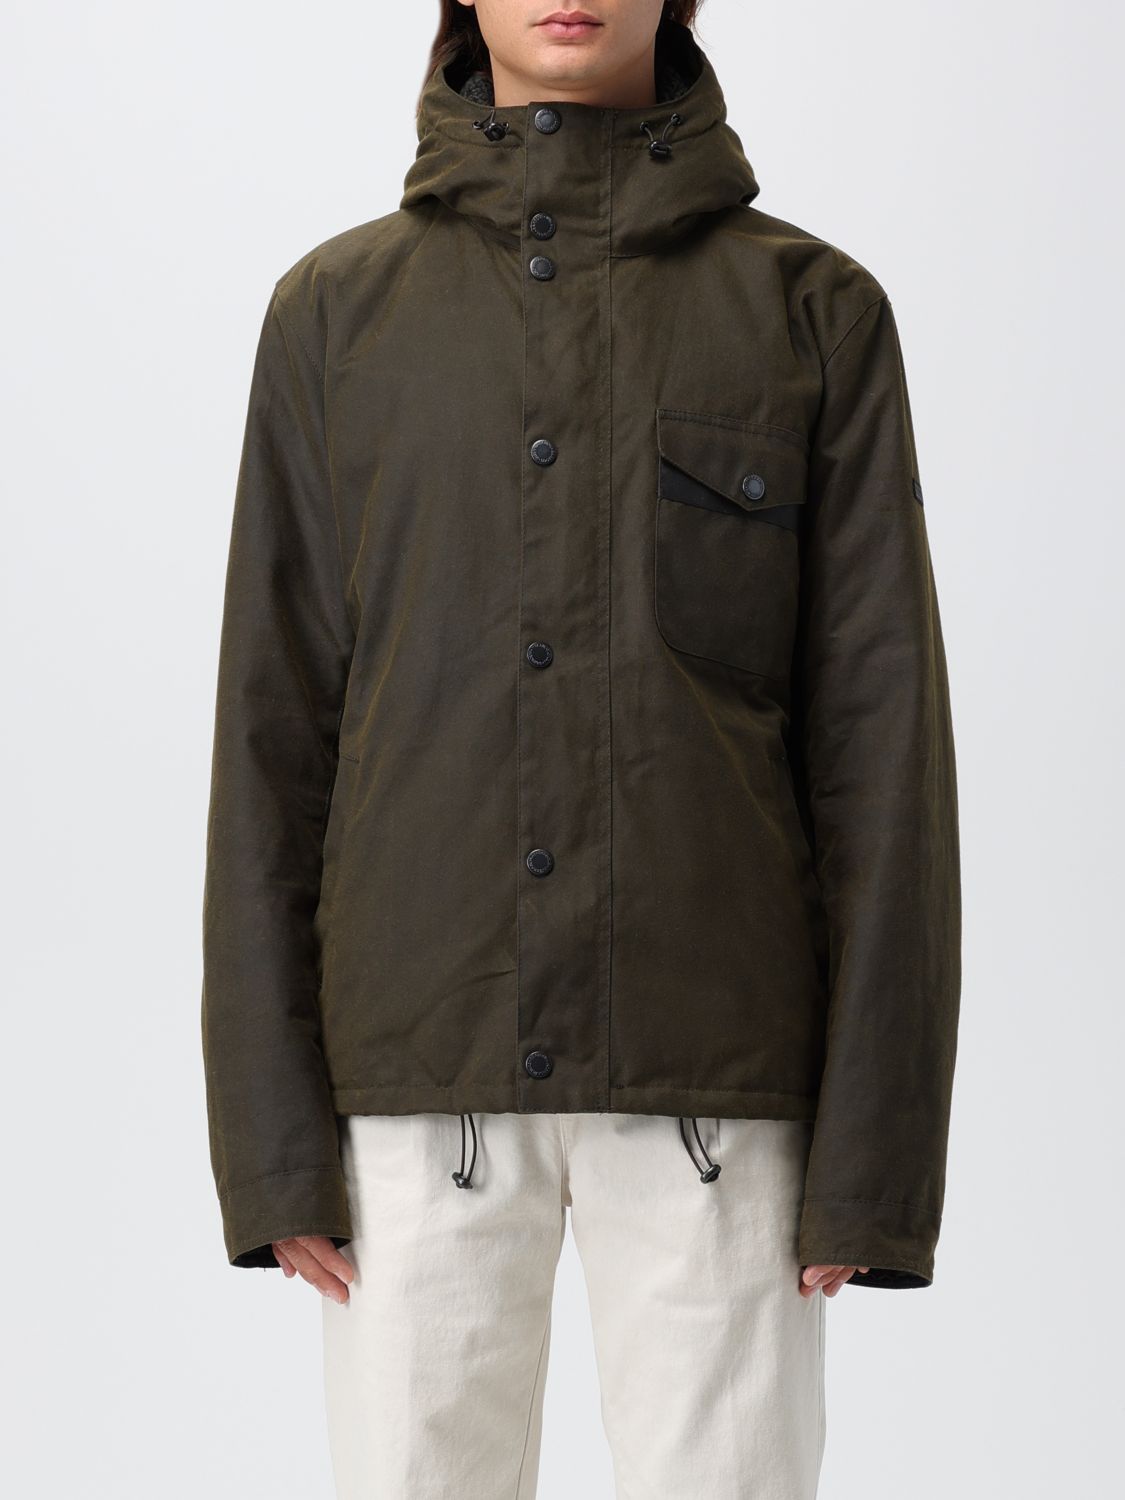 BARBOUR: jacket for man - Olive | Barbour jacket MWX1372MWX online at ...